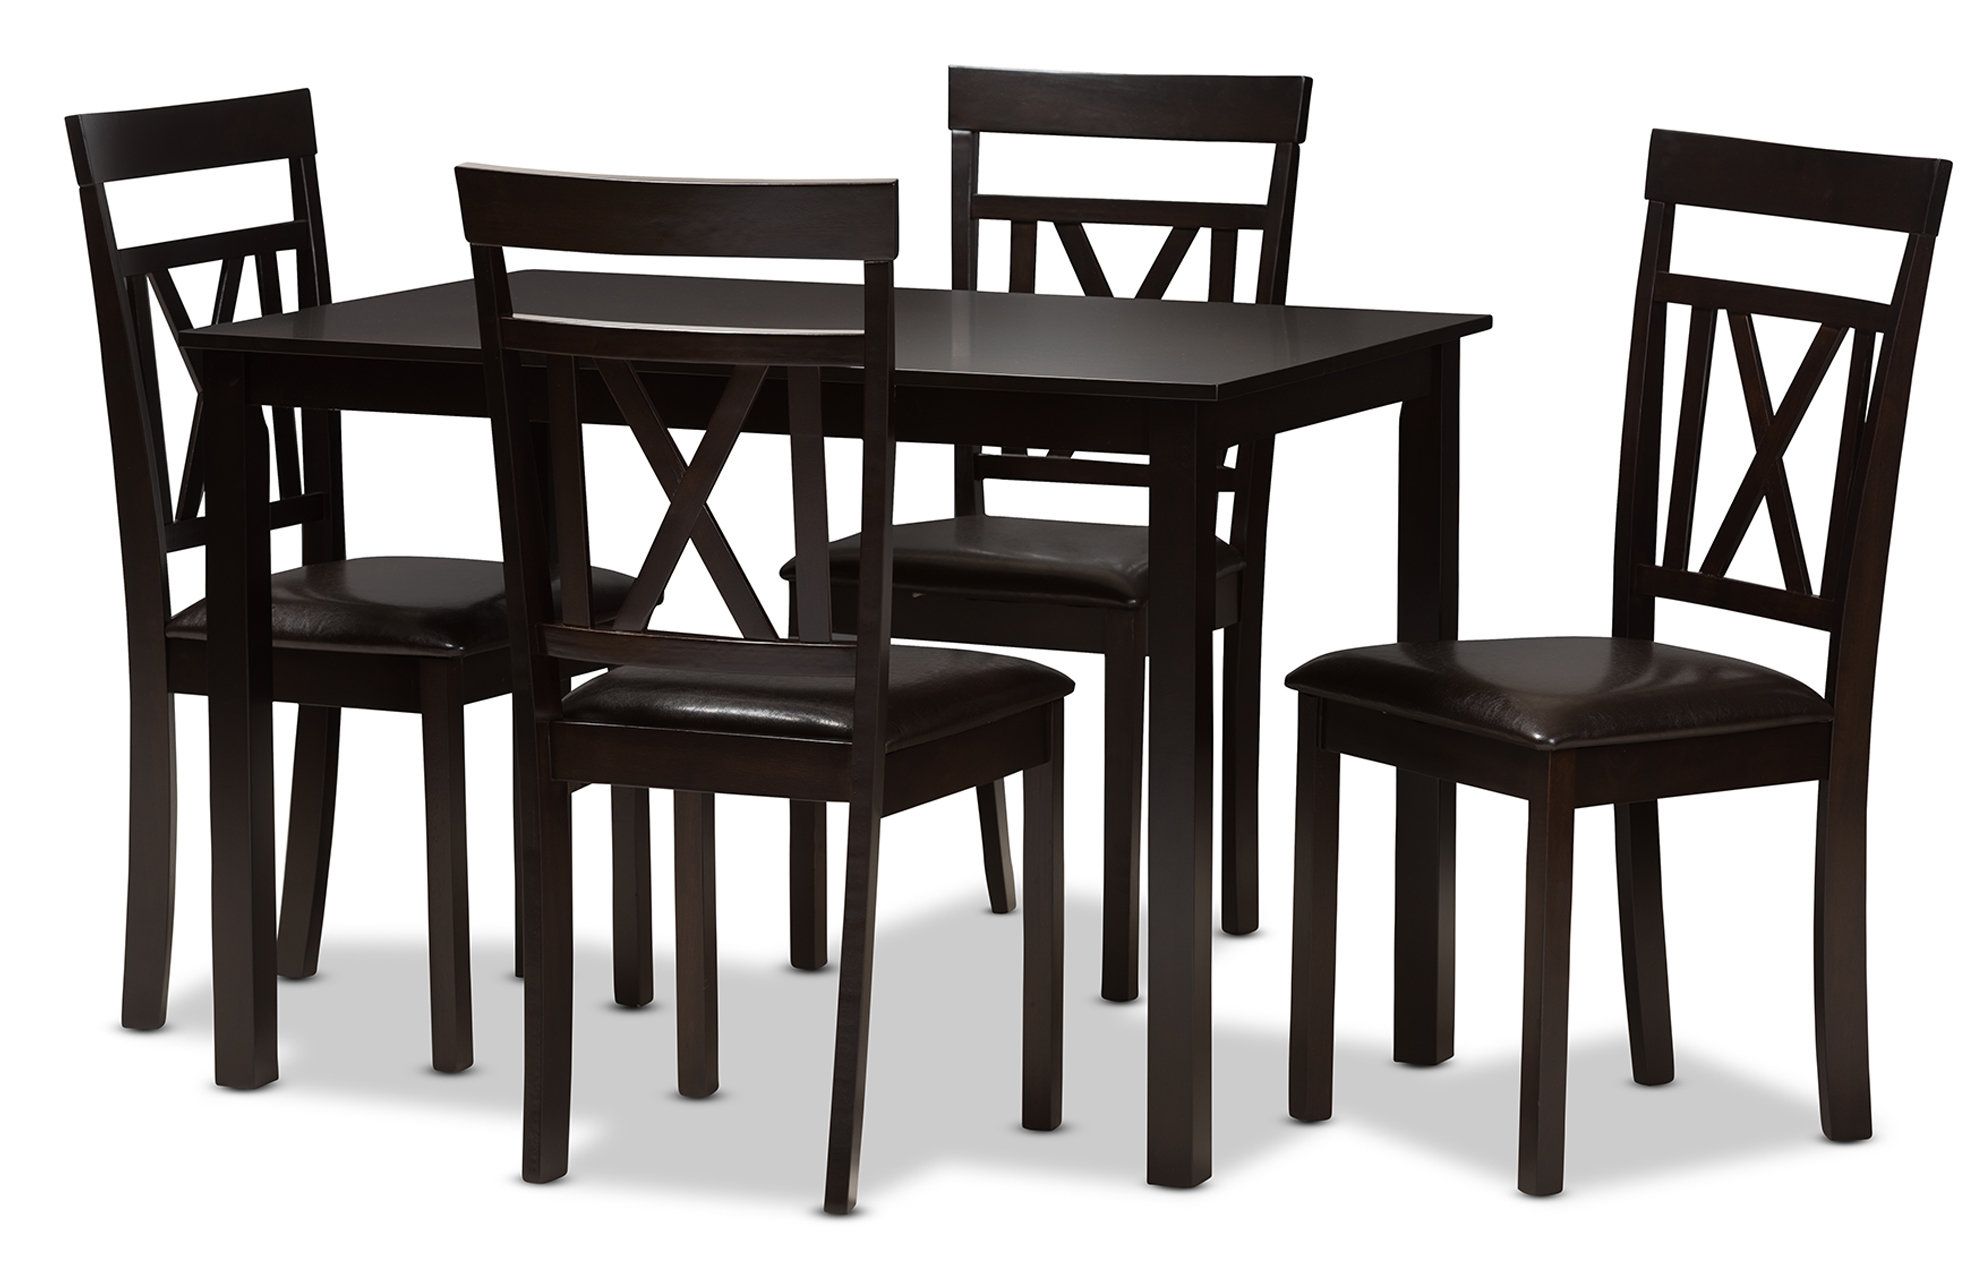 Whitbey Modern And Contemporary 5 Piece Breakfast Nook Dining Set Inside Most Up To Date 5 Piece Breakfast Nook Dining Sets (Photo 6 of 20)